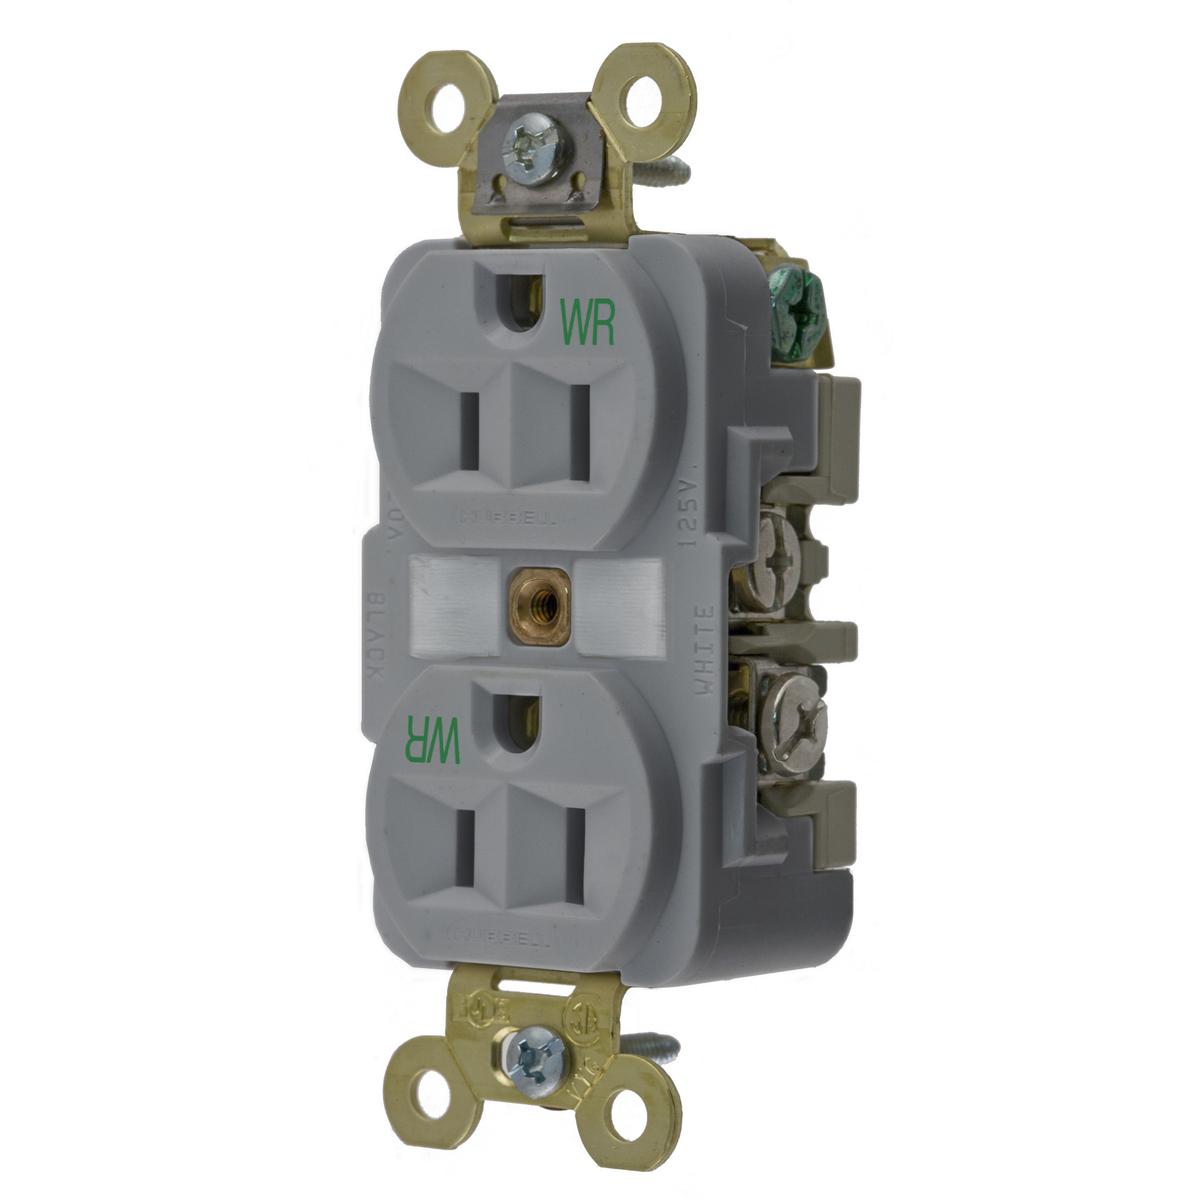 Hubbell HBL5262GYWR Straight Blade Devices, Receptacles, Weather-Resistant Duplex, Industrial Grade, 15A 125V, 2-Pole 3-Wire Grounding, 5-15R, Gray, Single Pack.  ; Weather-resistance complies with national electrical code requirements ; Finder Groove Face ; One-piece brass 